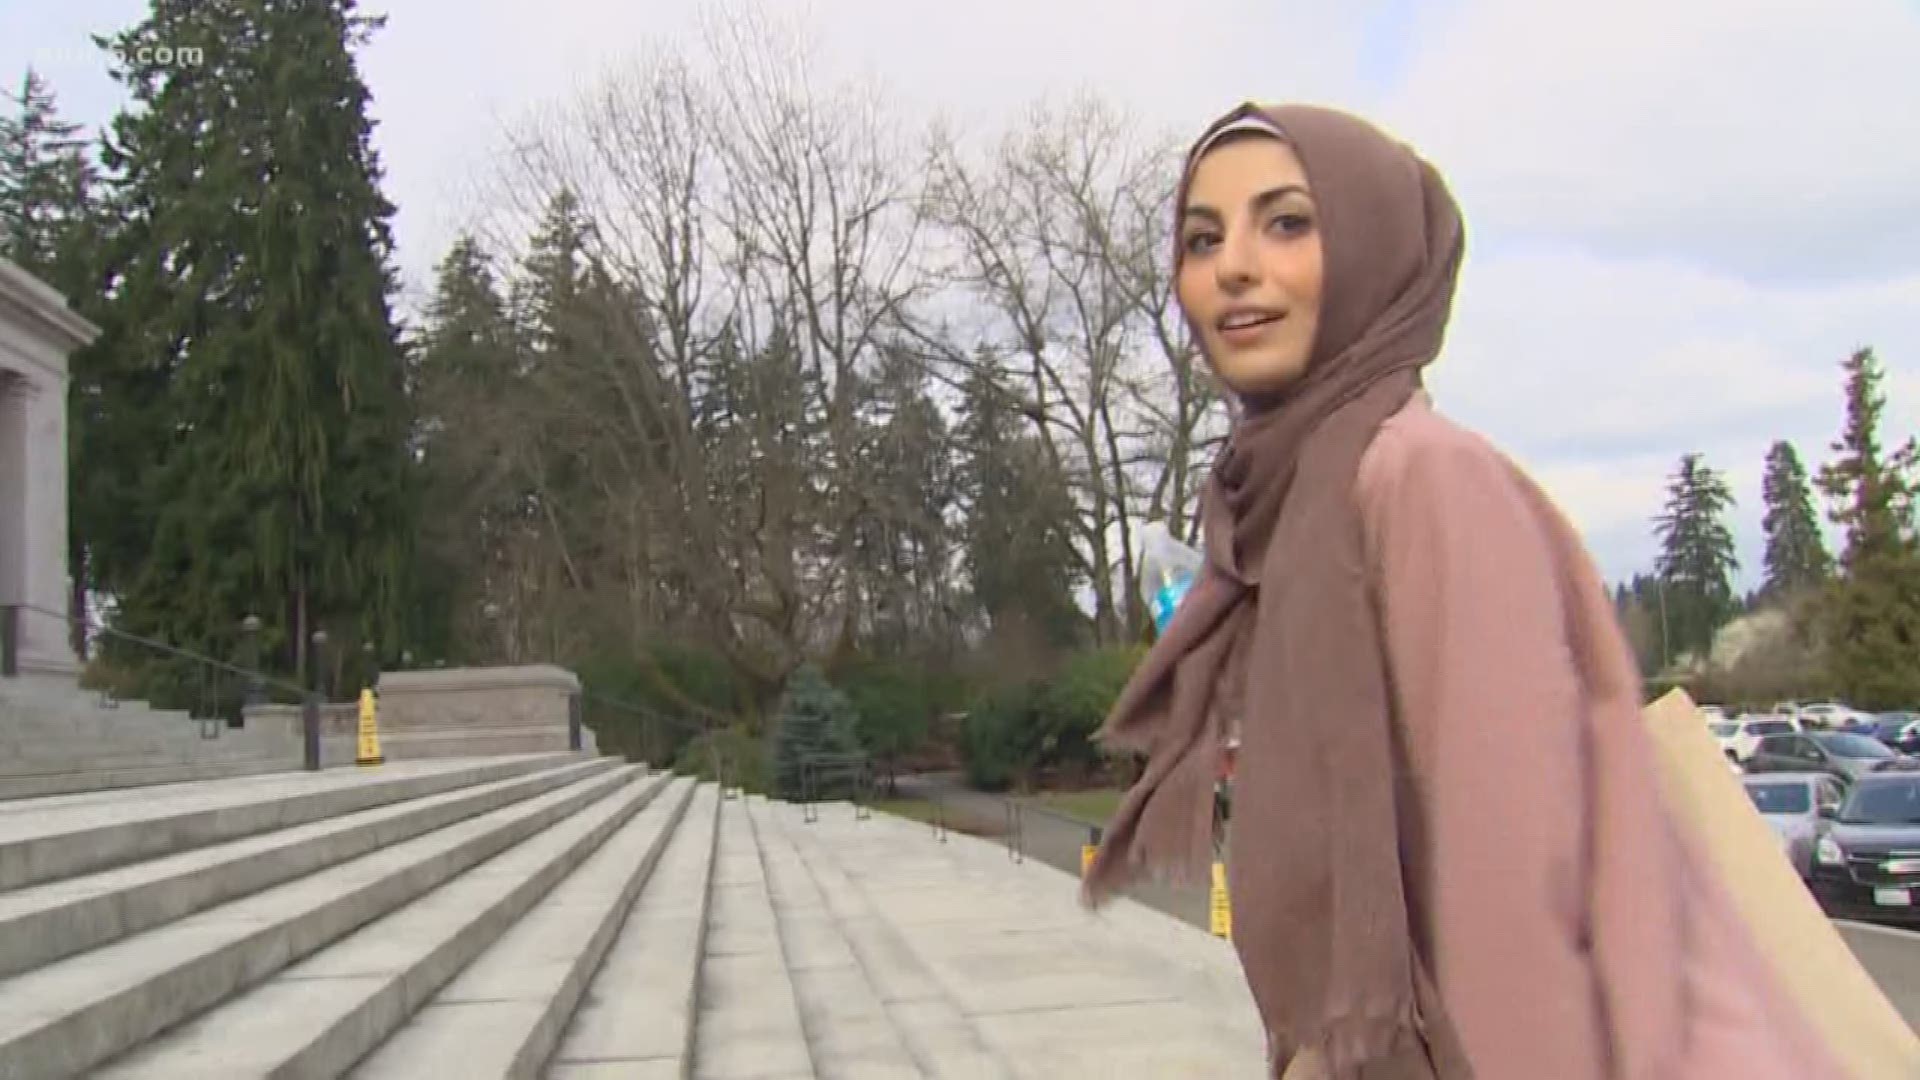 Attacks on Muslims around the world have motivated members of the Muslim community in Washington State to look for protections through new state laws. On what's know as "Muslim Day at the Capitol," South Bureau Chief Drew Mikkelsen found out the most important issues facing Muslims this year.